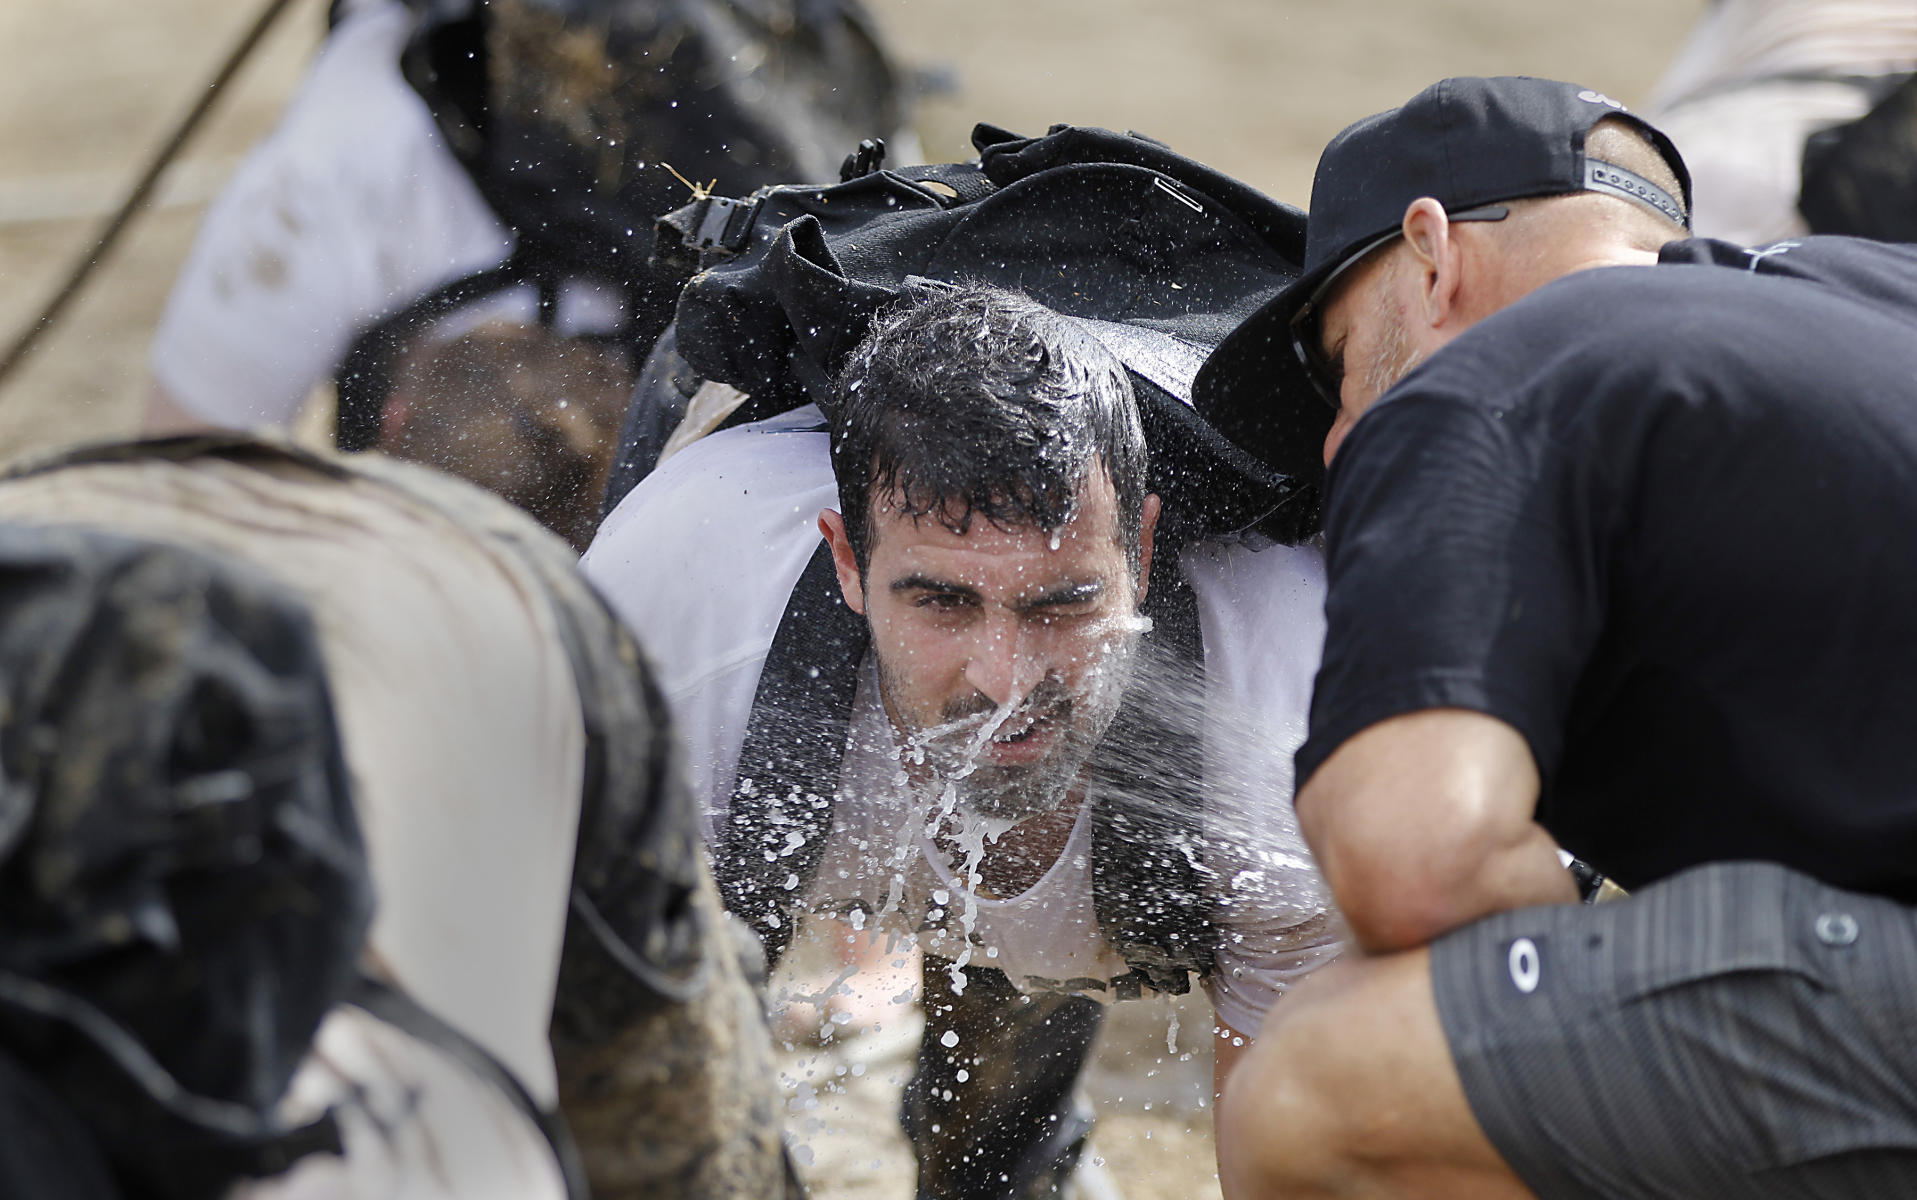 SEALFIT, a San Diego business transforms participants using Navy SEAL training methods